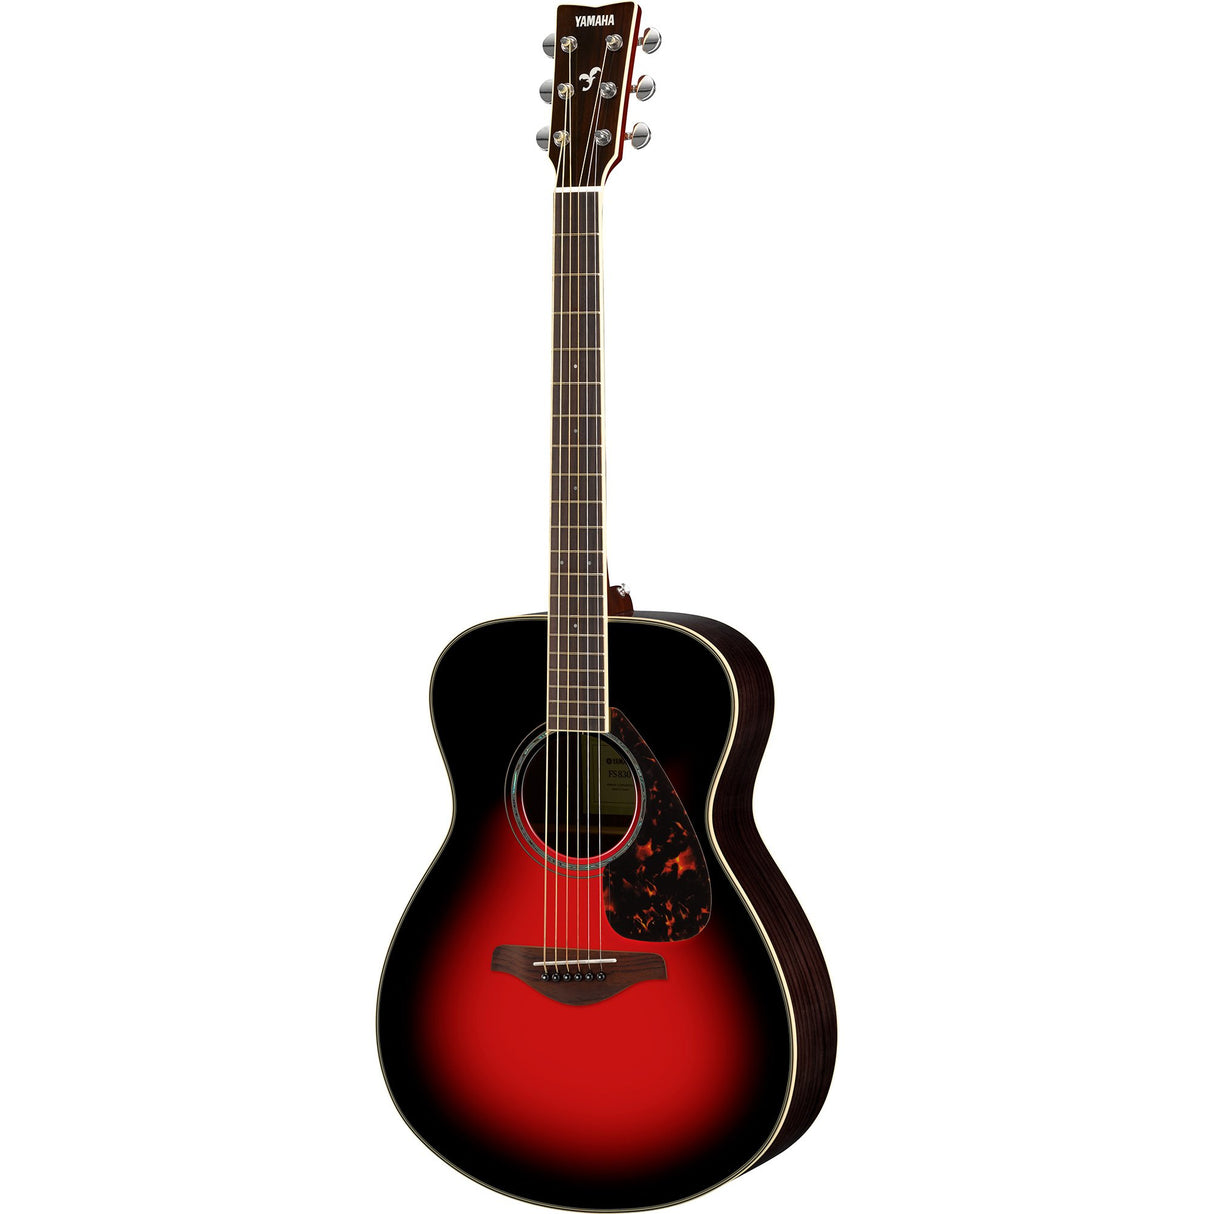 Yamaha FS830 Small Body Acoustic Guitar - Dusk Red